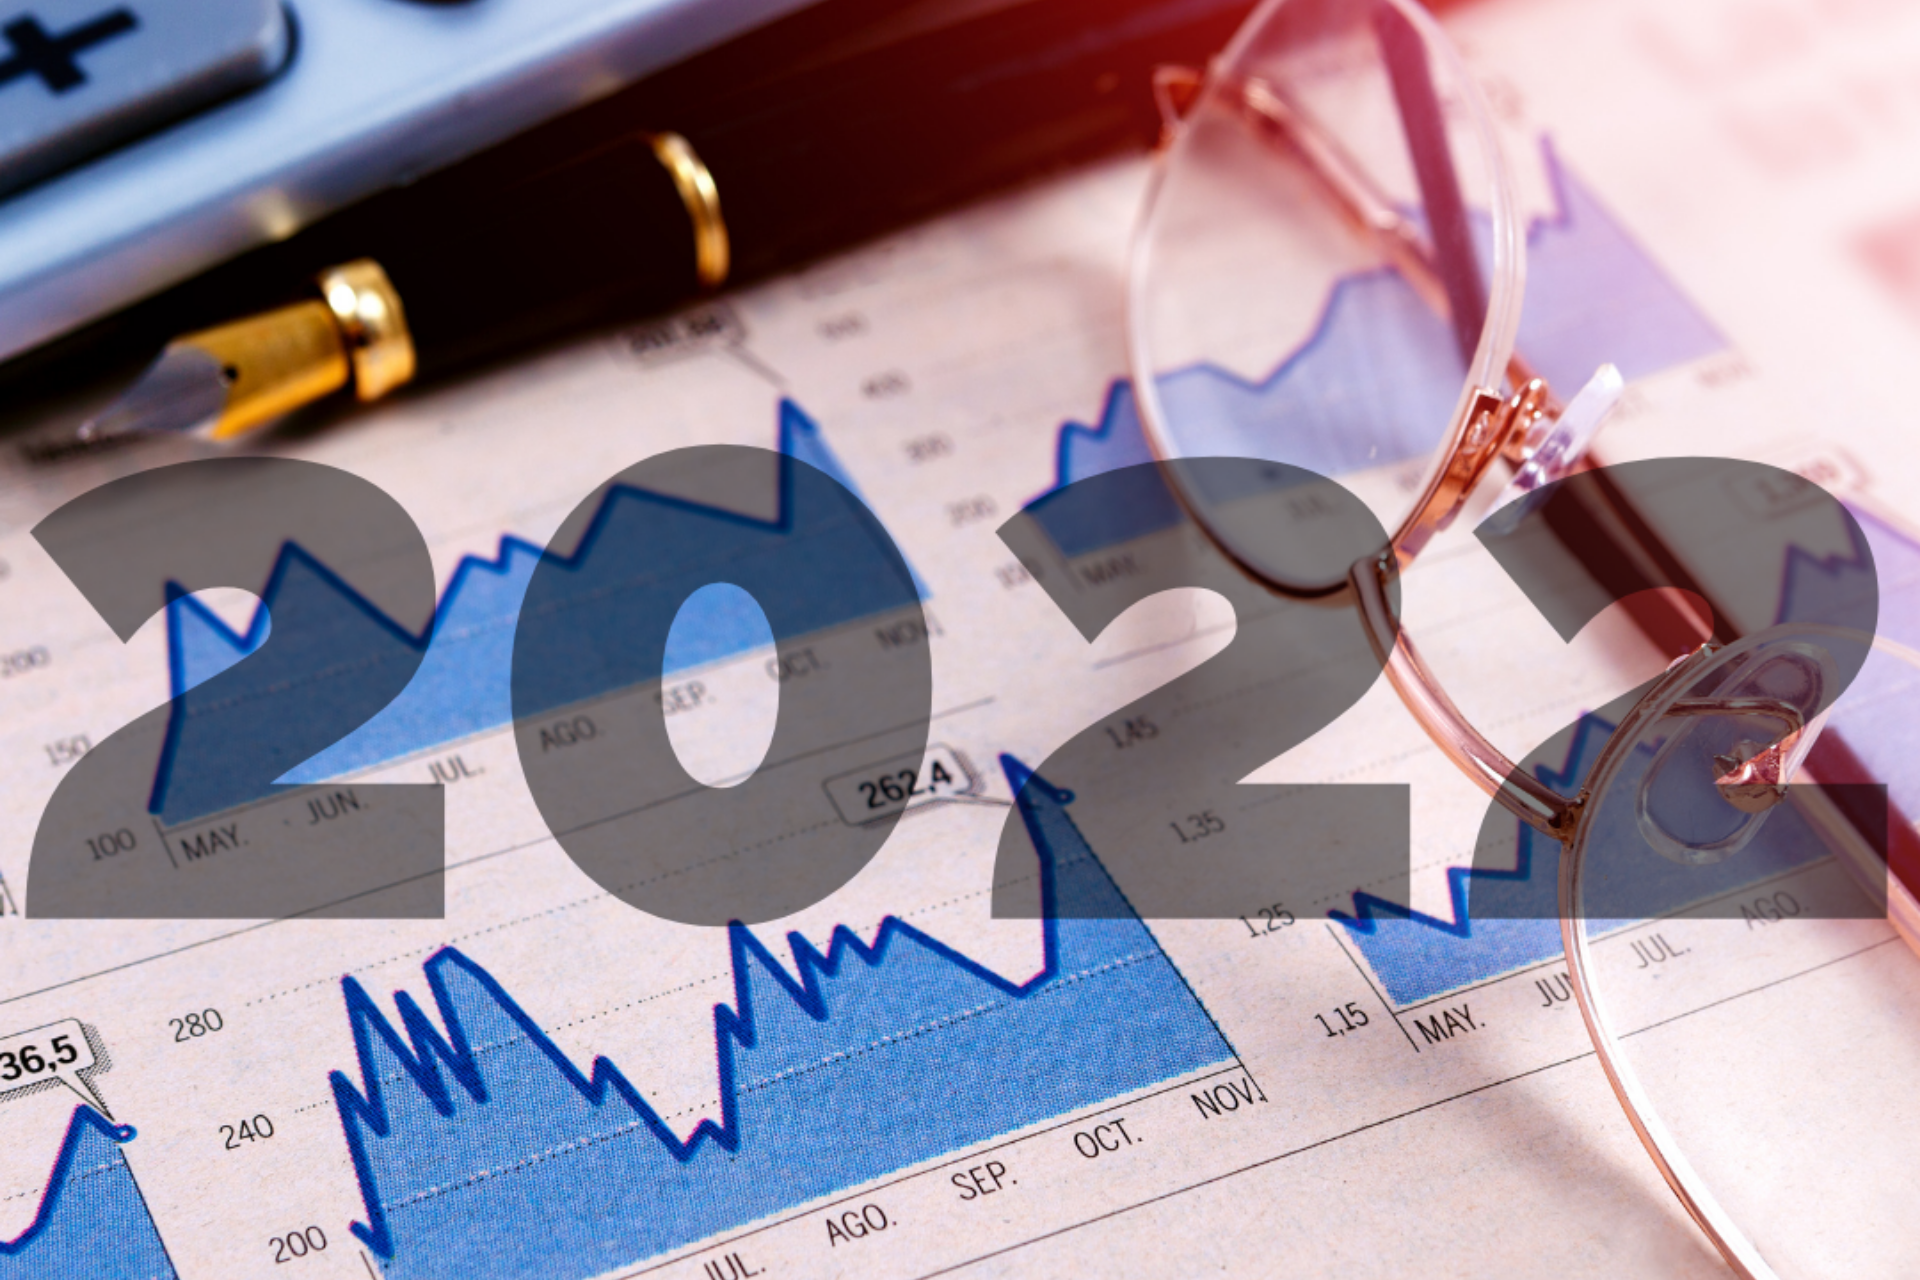 PR and marketing trends for 2022